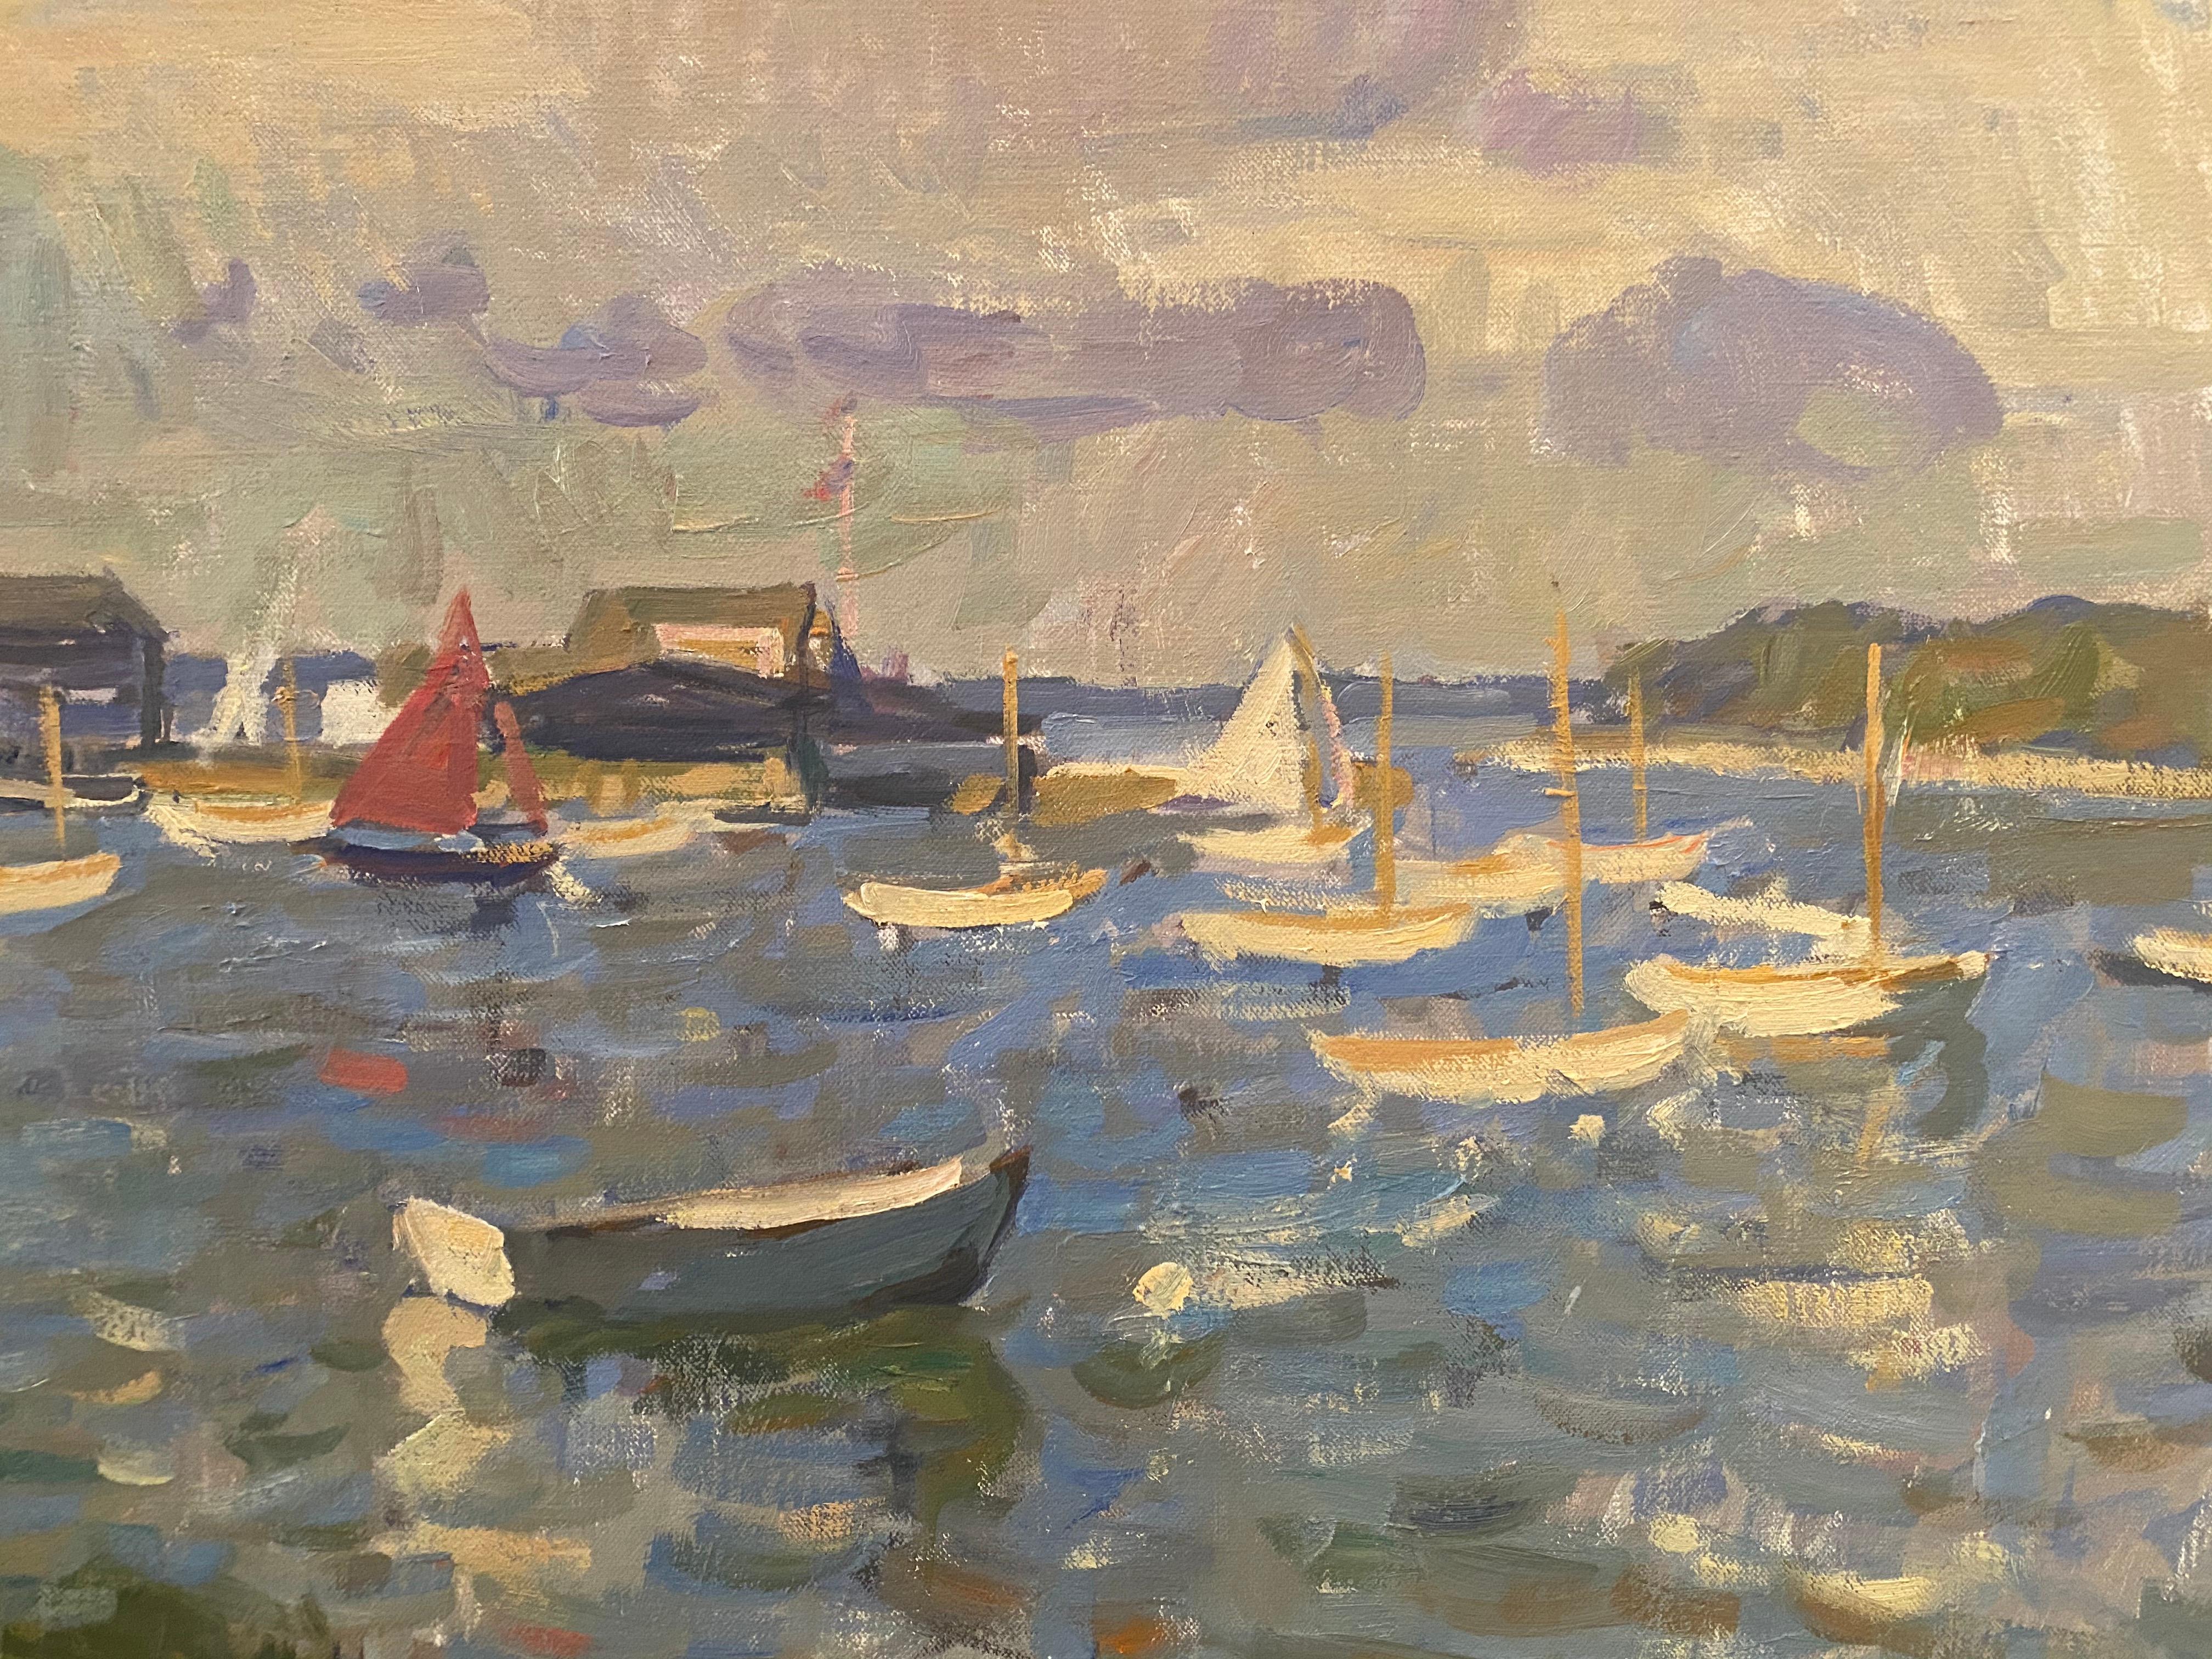 Red Sail at Dering Harbor - American Impressionist Painting by Ben Fenske